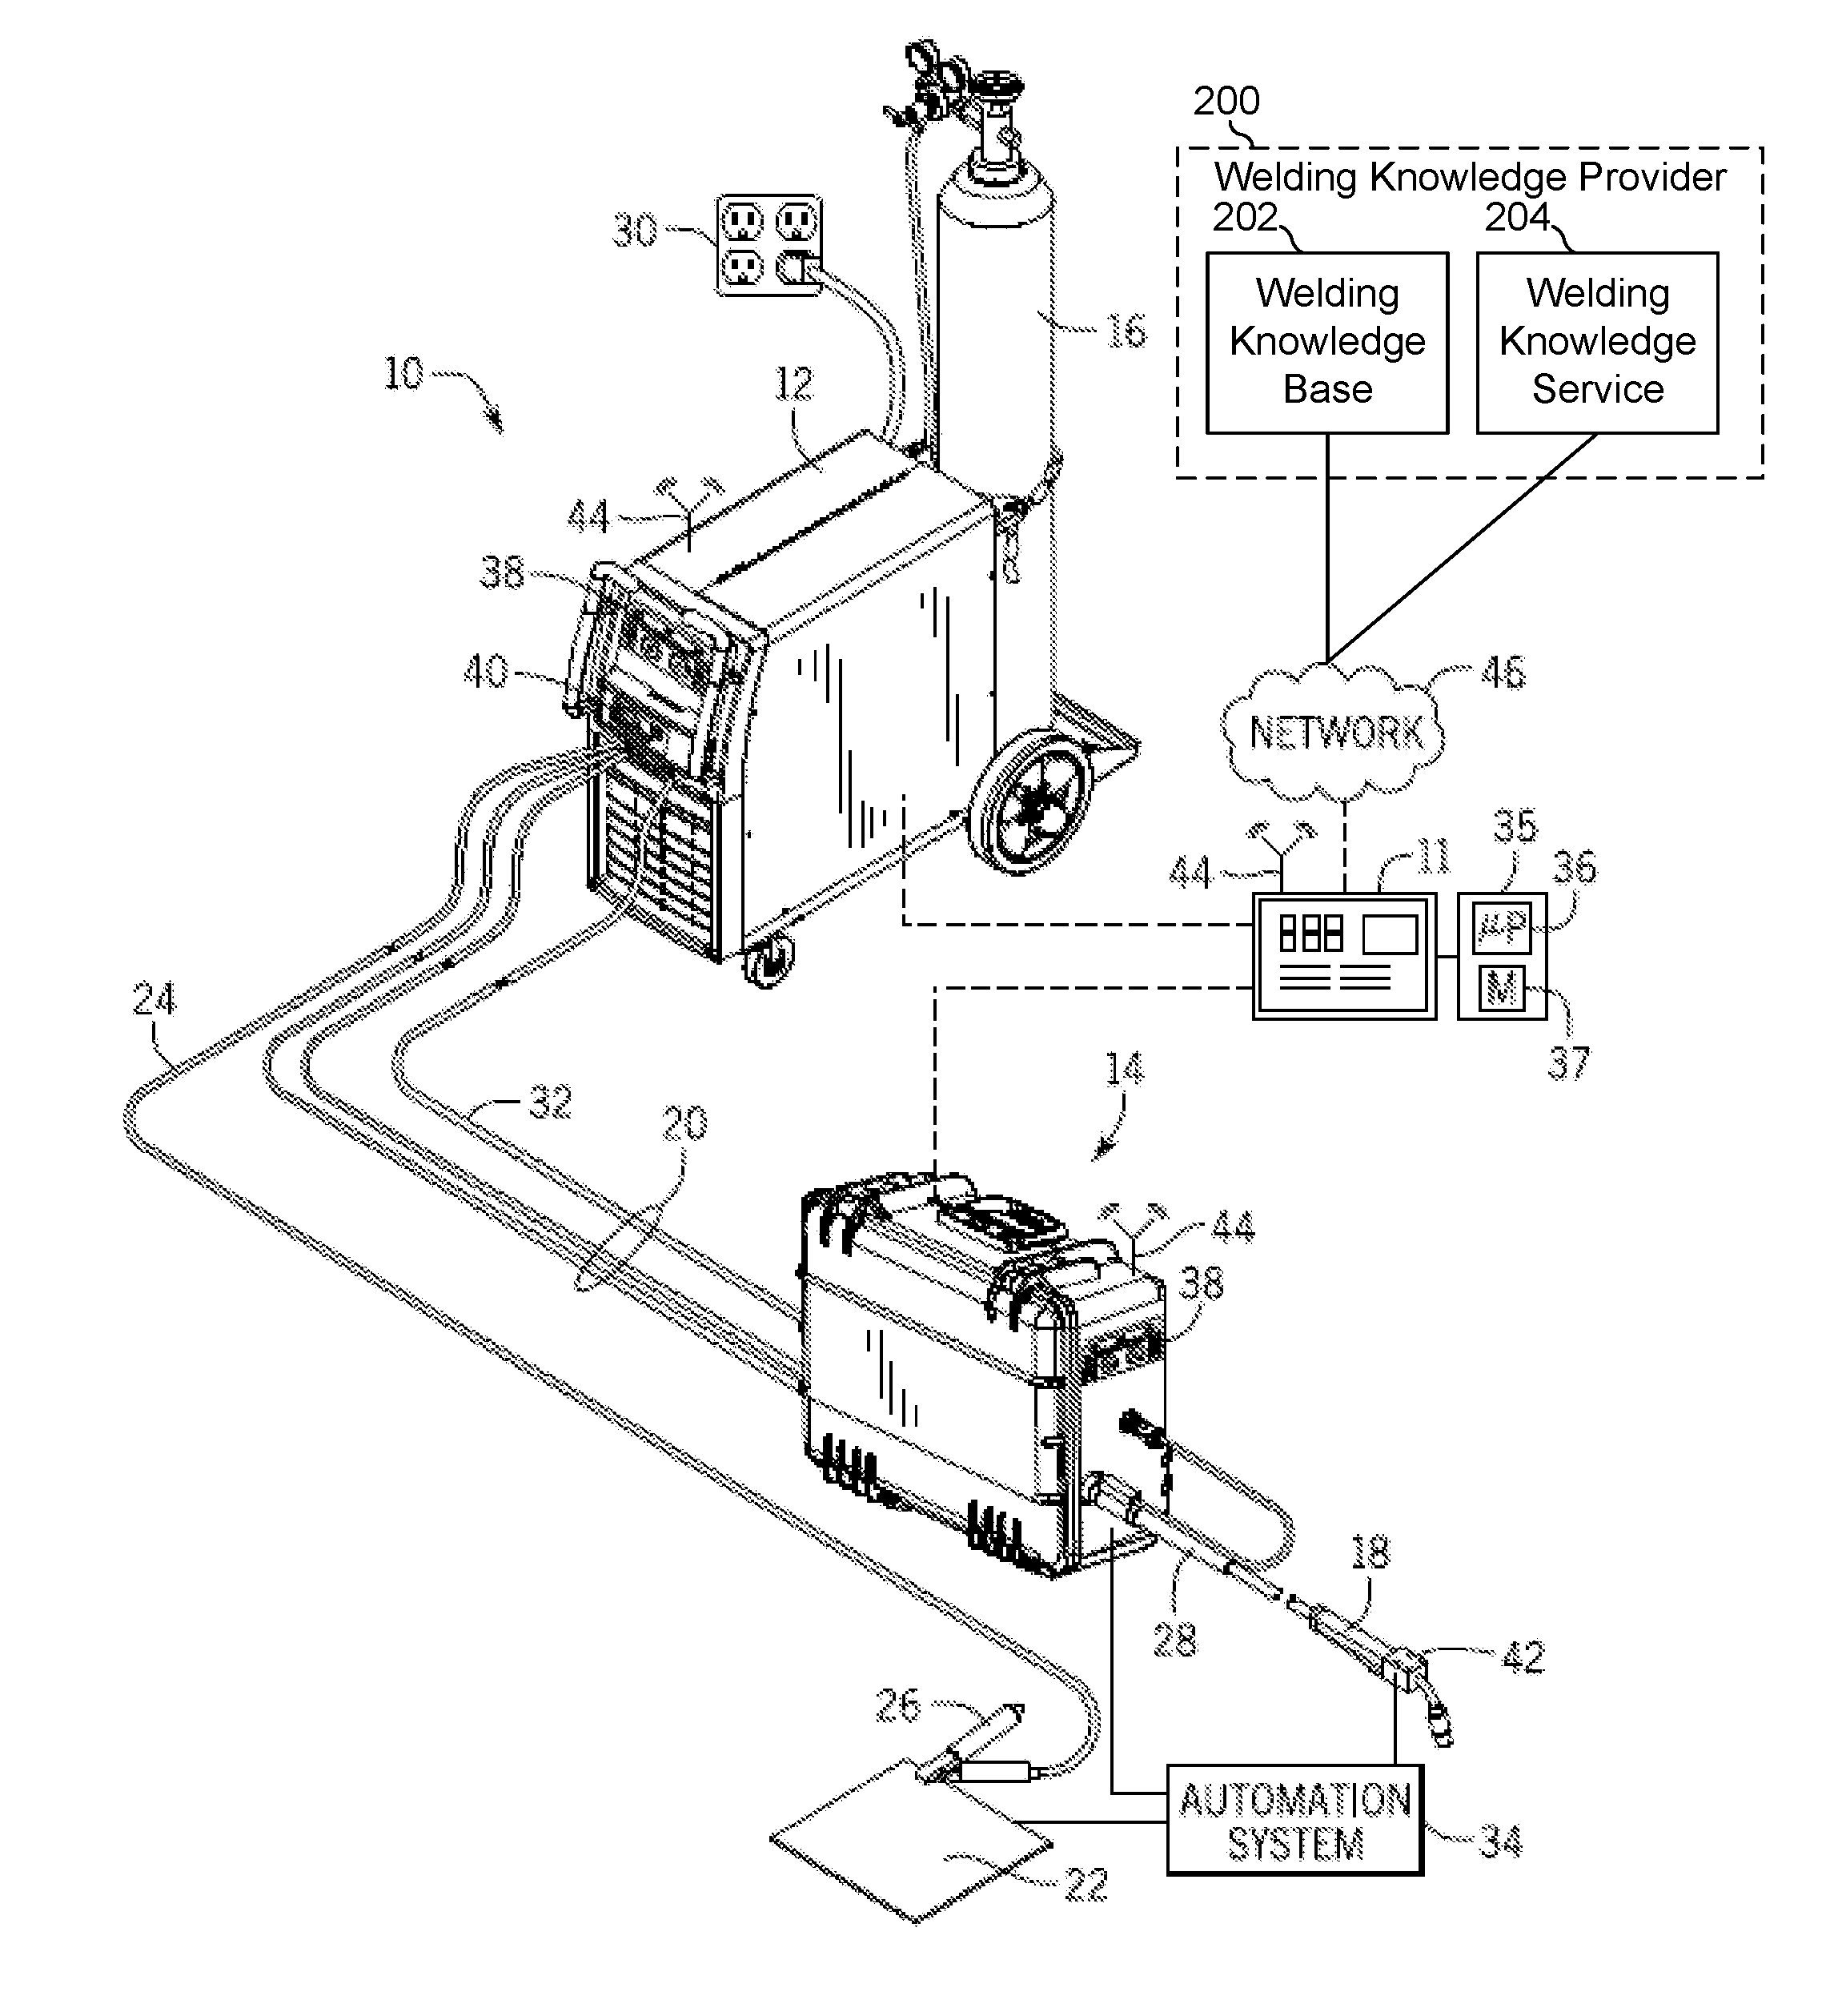 Systems and methods for selecting weld parameters